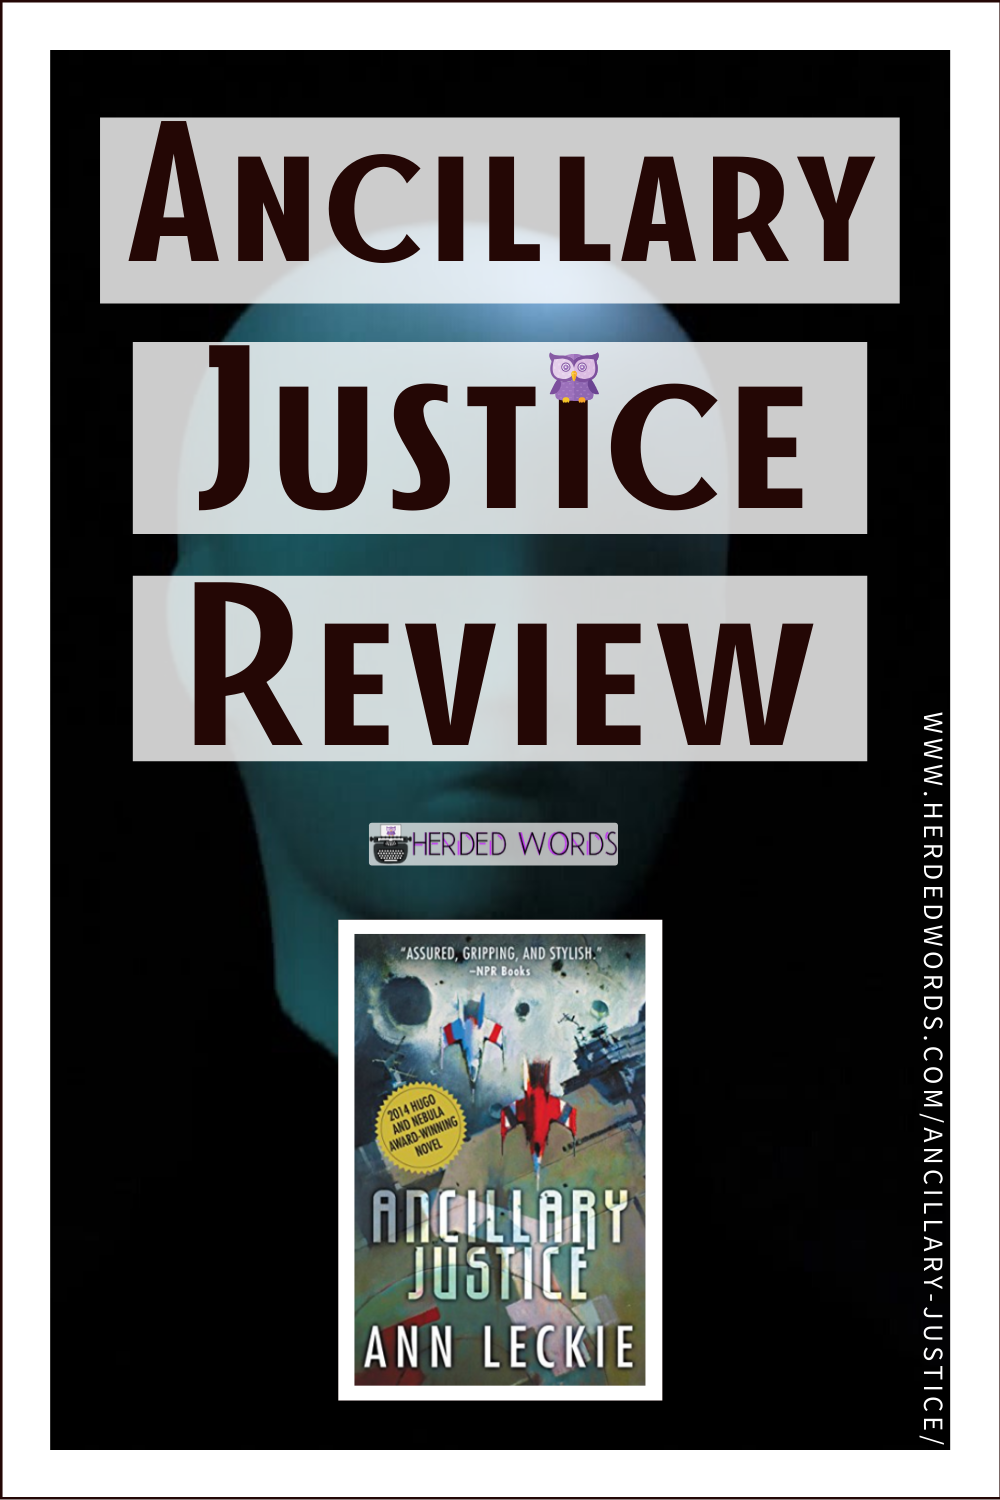 Pin This: Book Review & Analysis of ANCILLARY JUSTICE